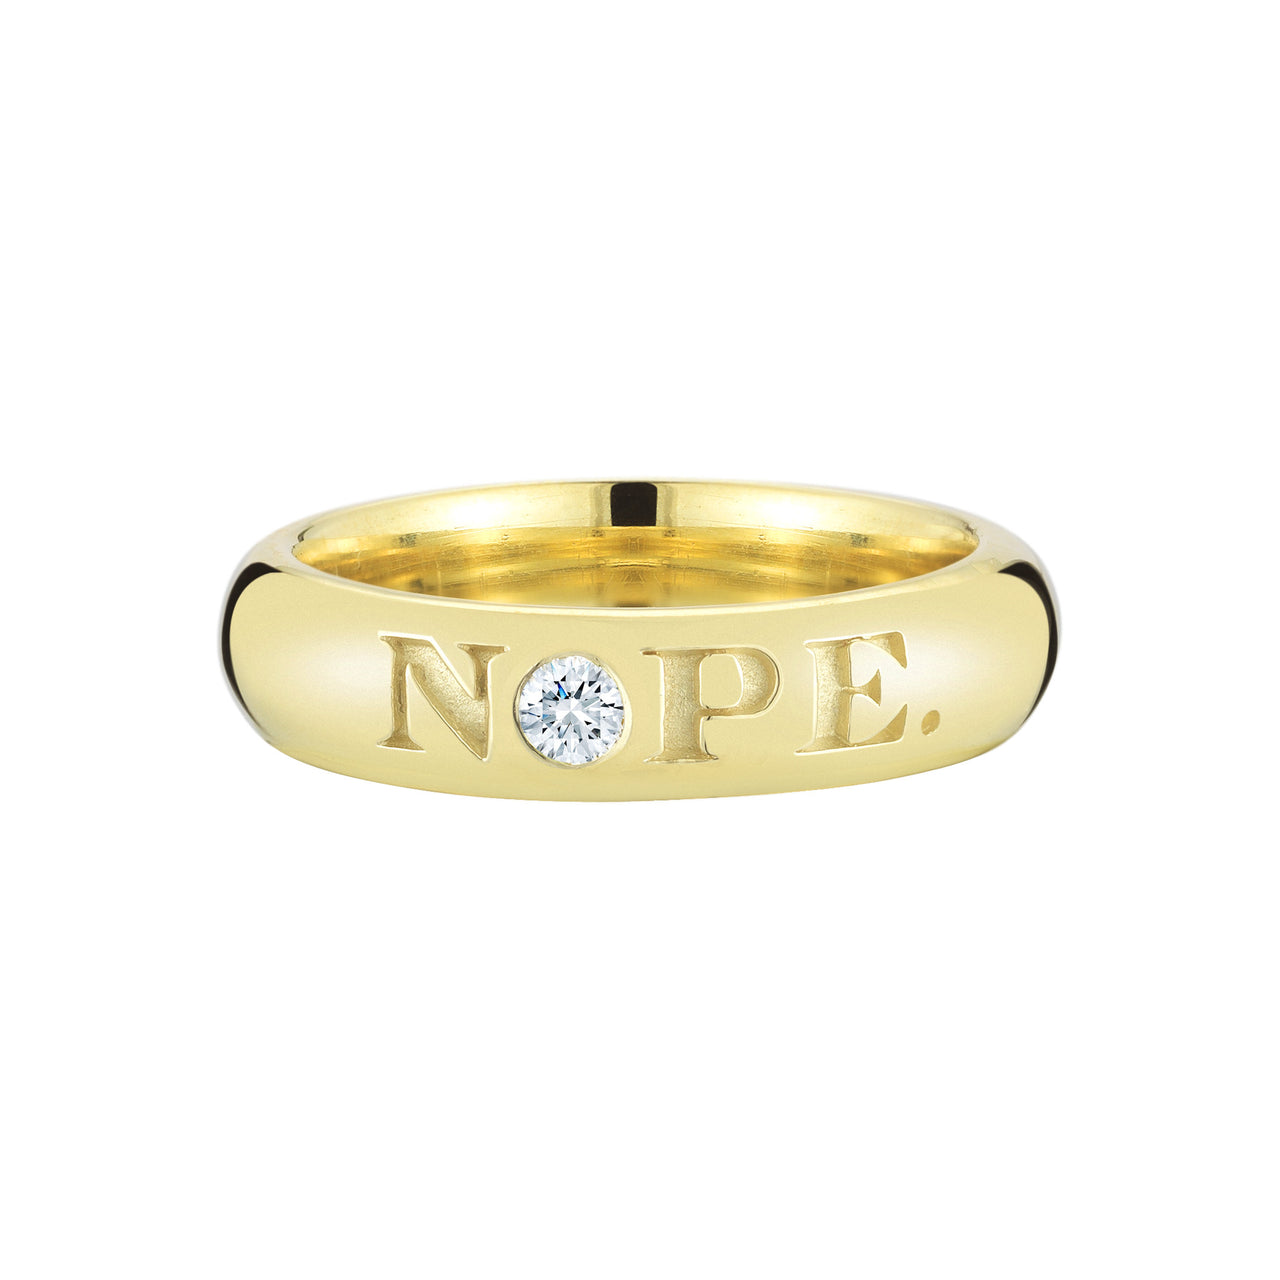 funky playful engraved NOPE and OK! diamond 18k yellow gold ring by finn by candice pool neistat